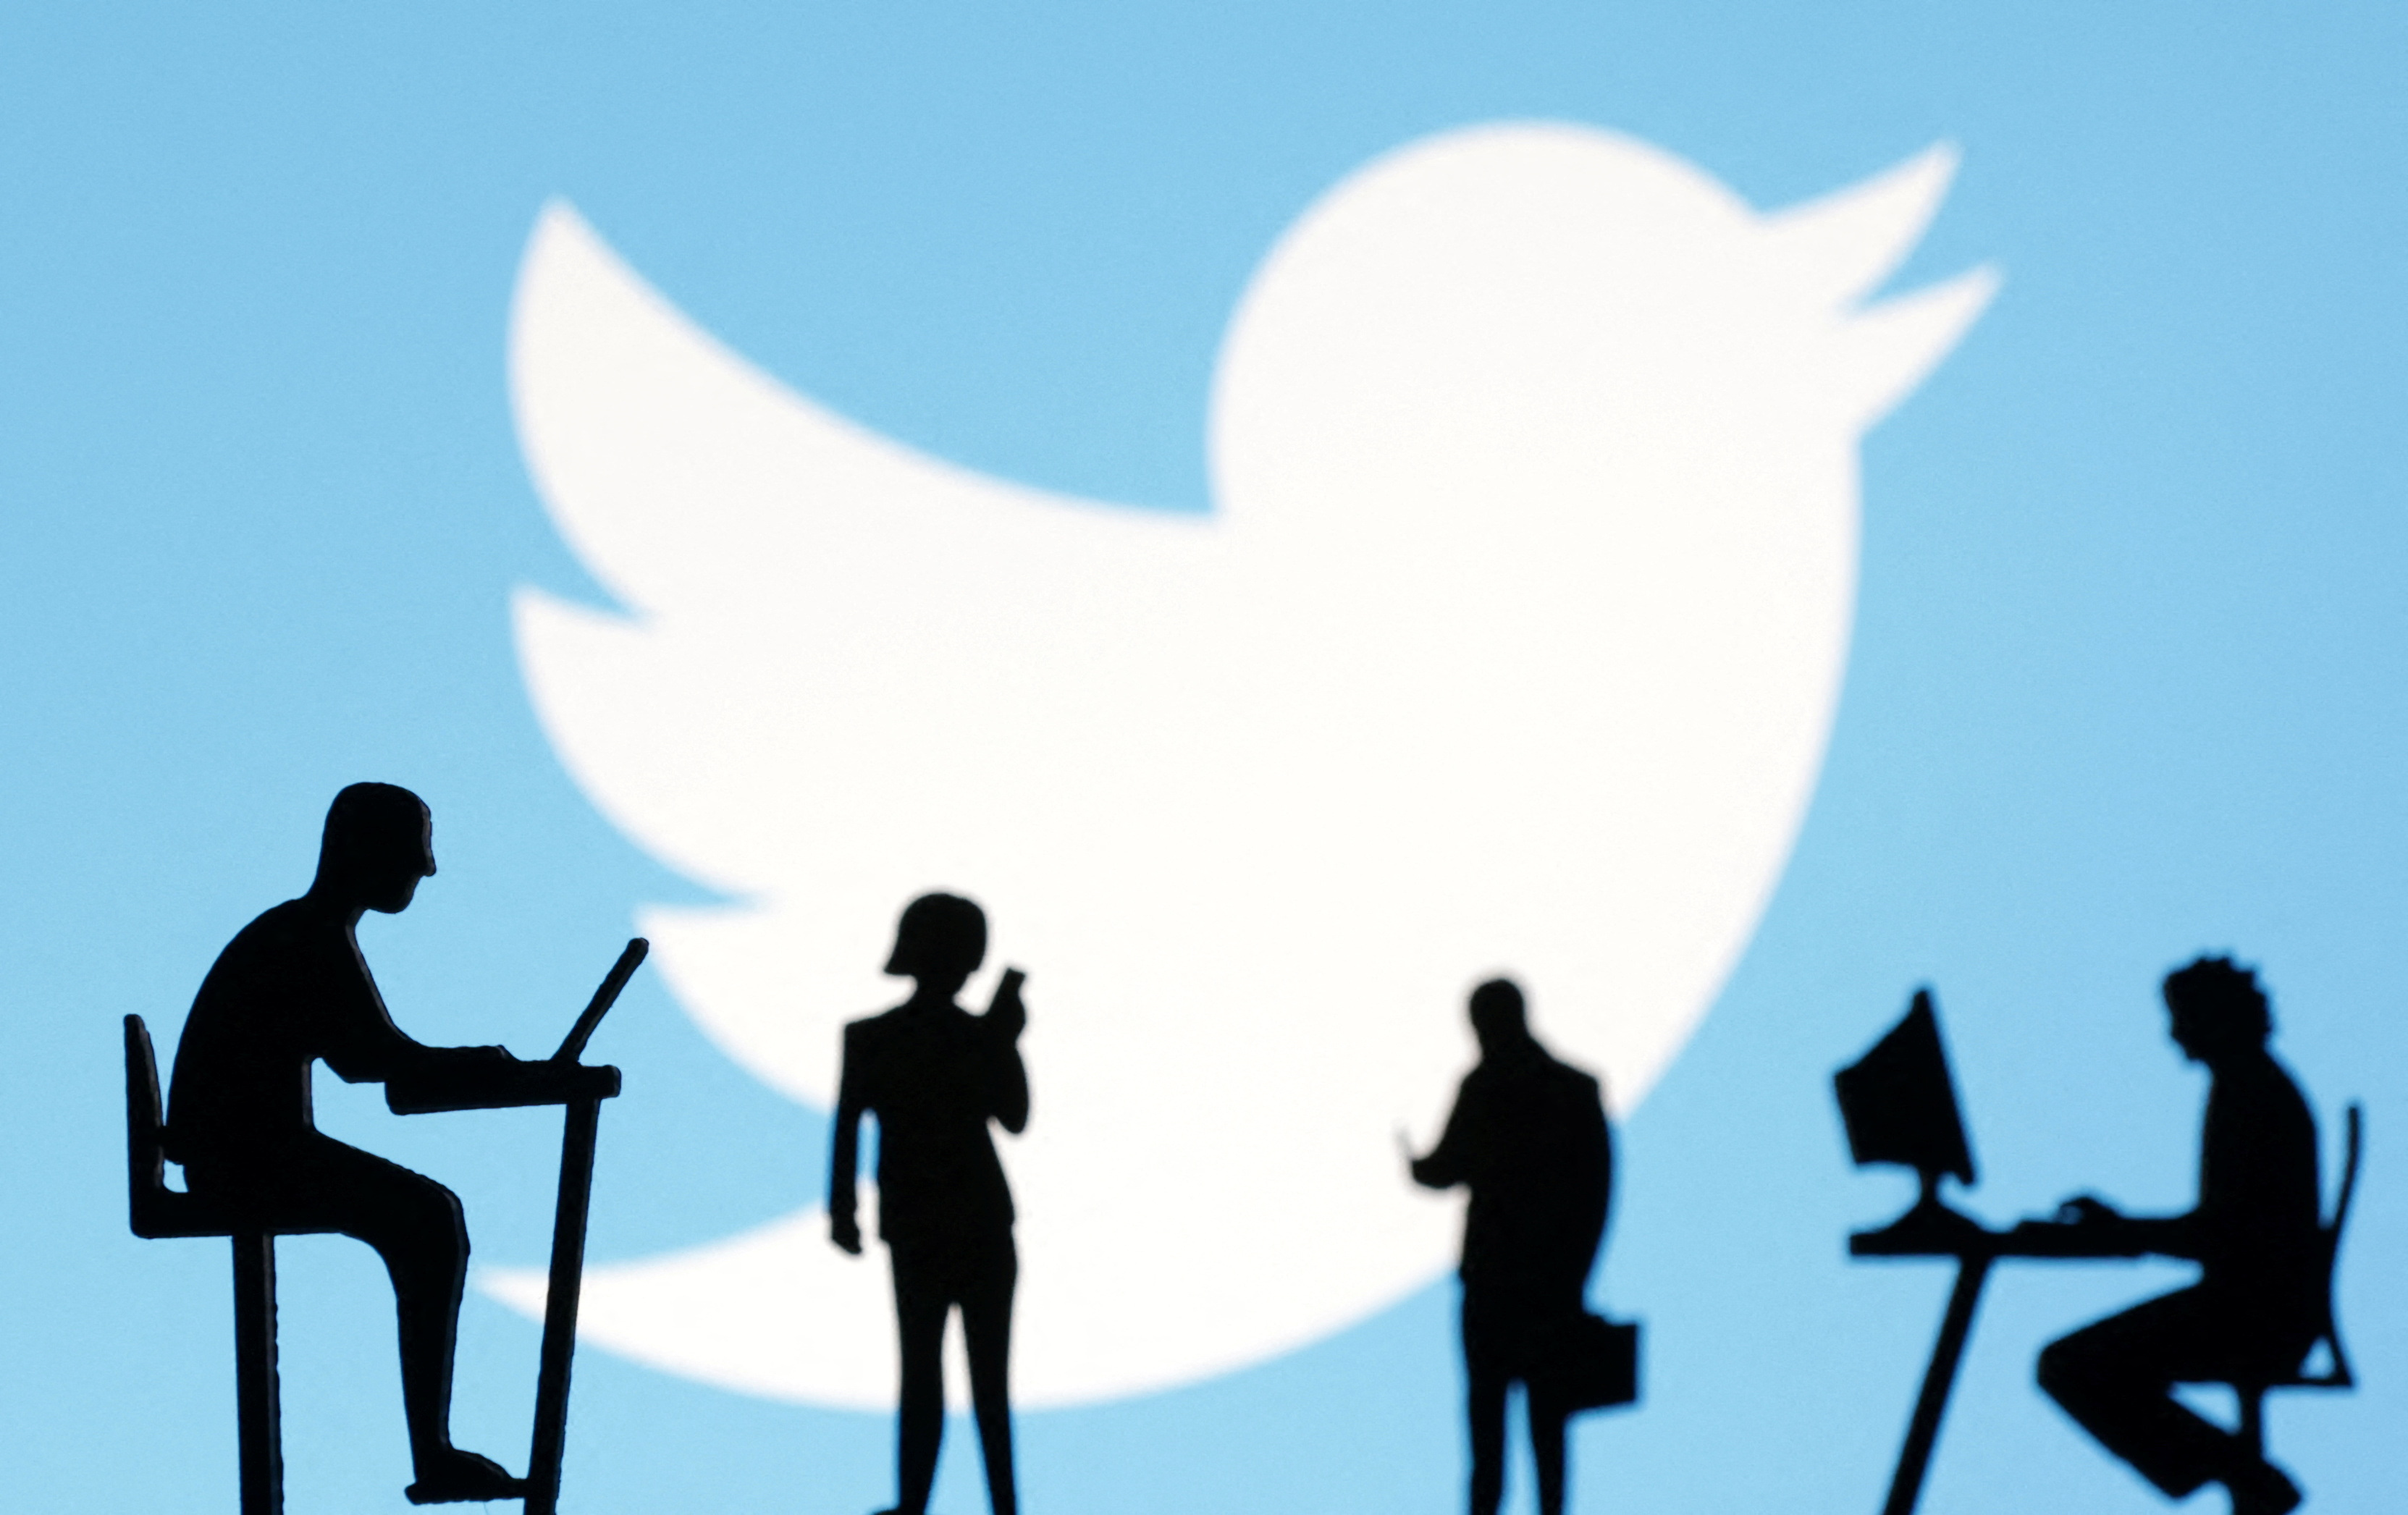 Twitter disbanded the Roths' content moderation board